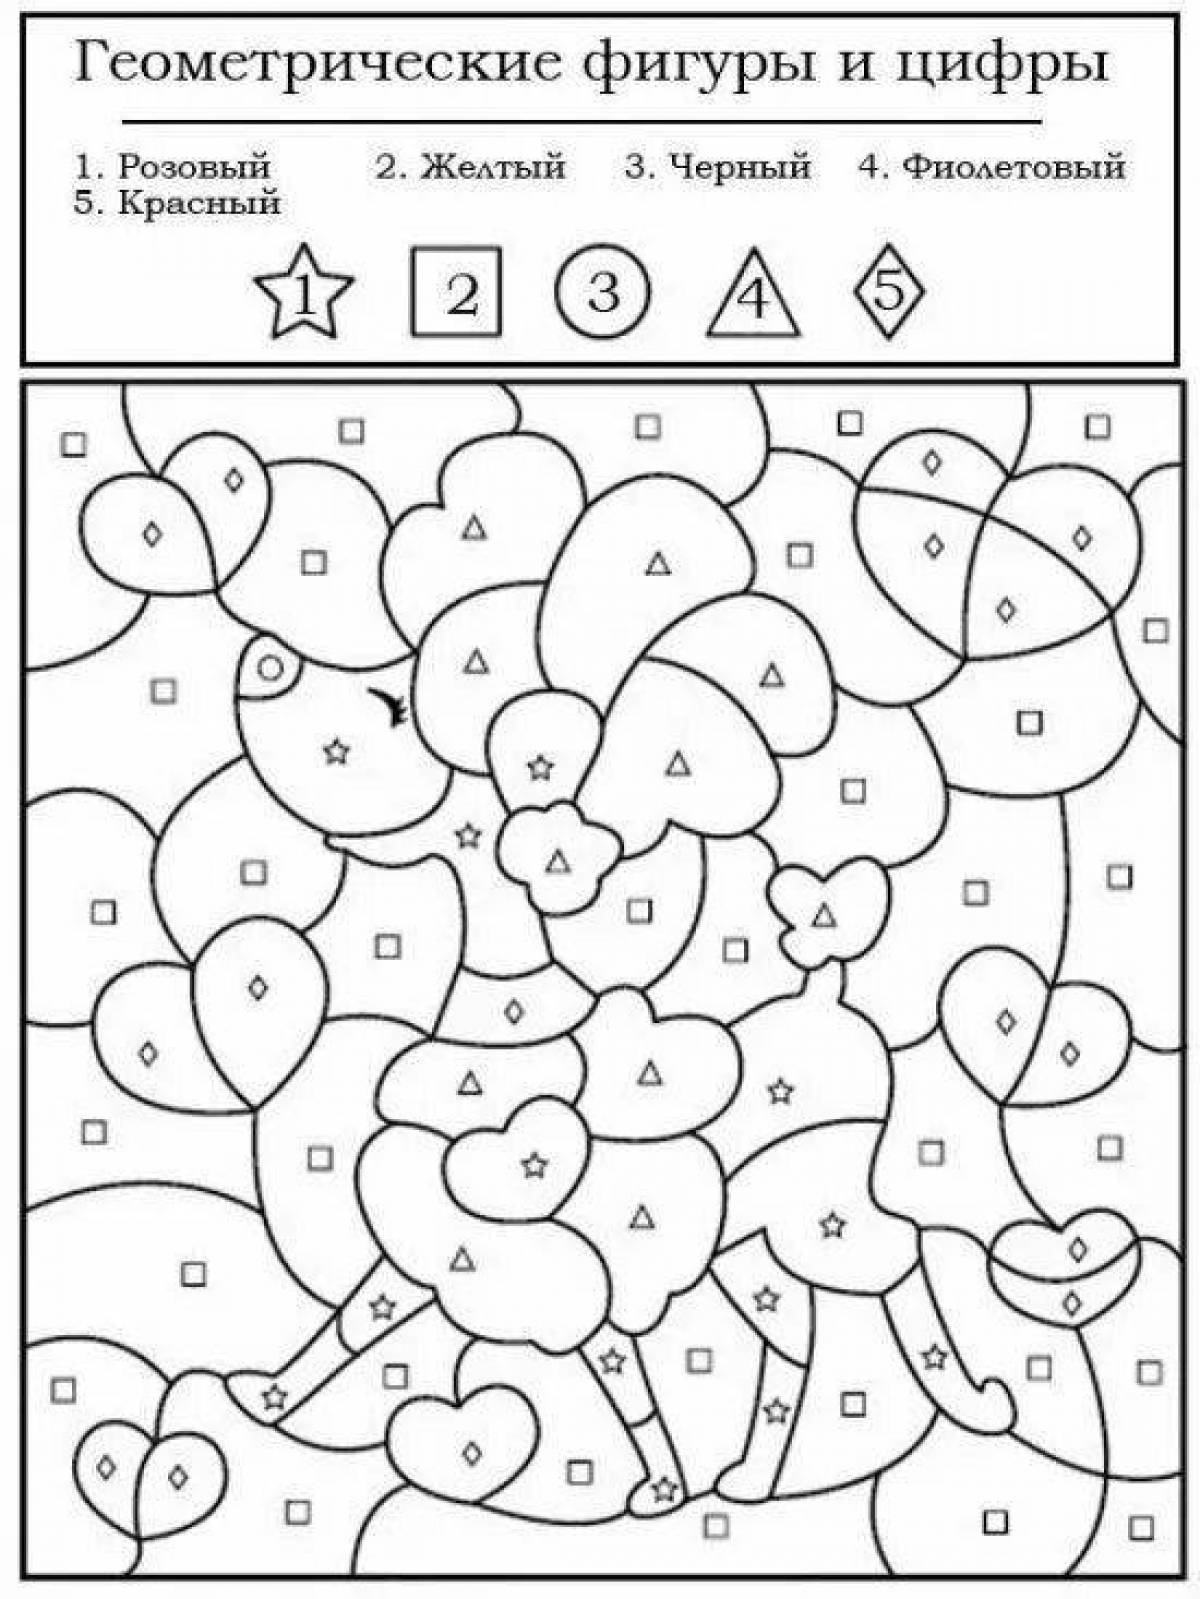 Colorful coloring book for preschoolers with challenging tasks